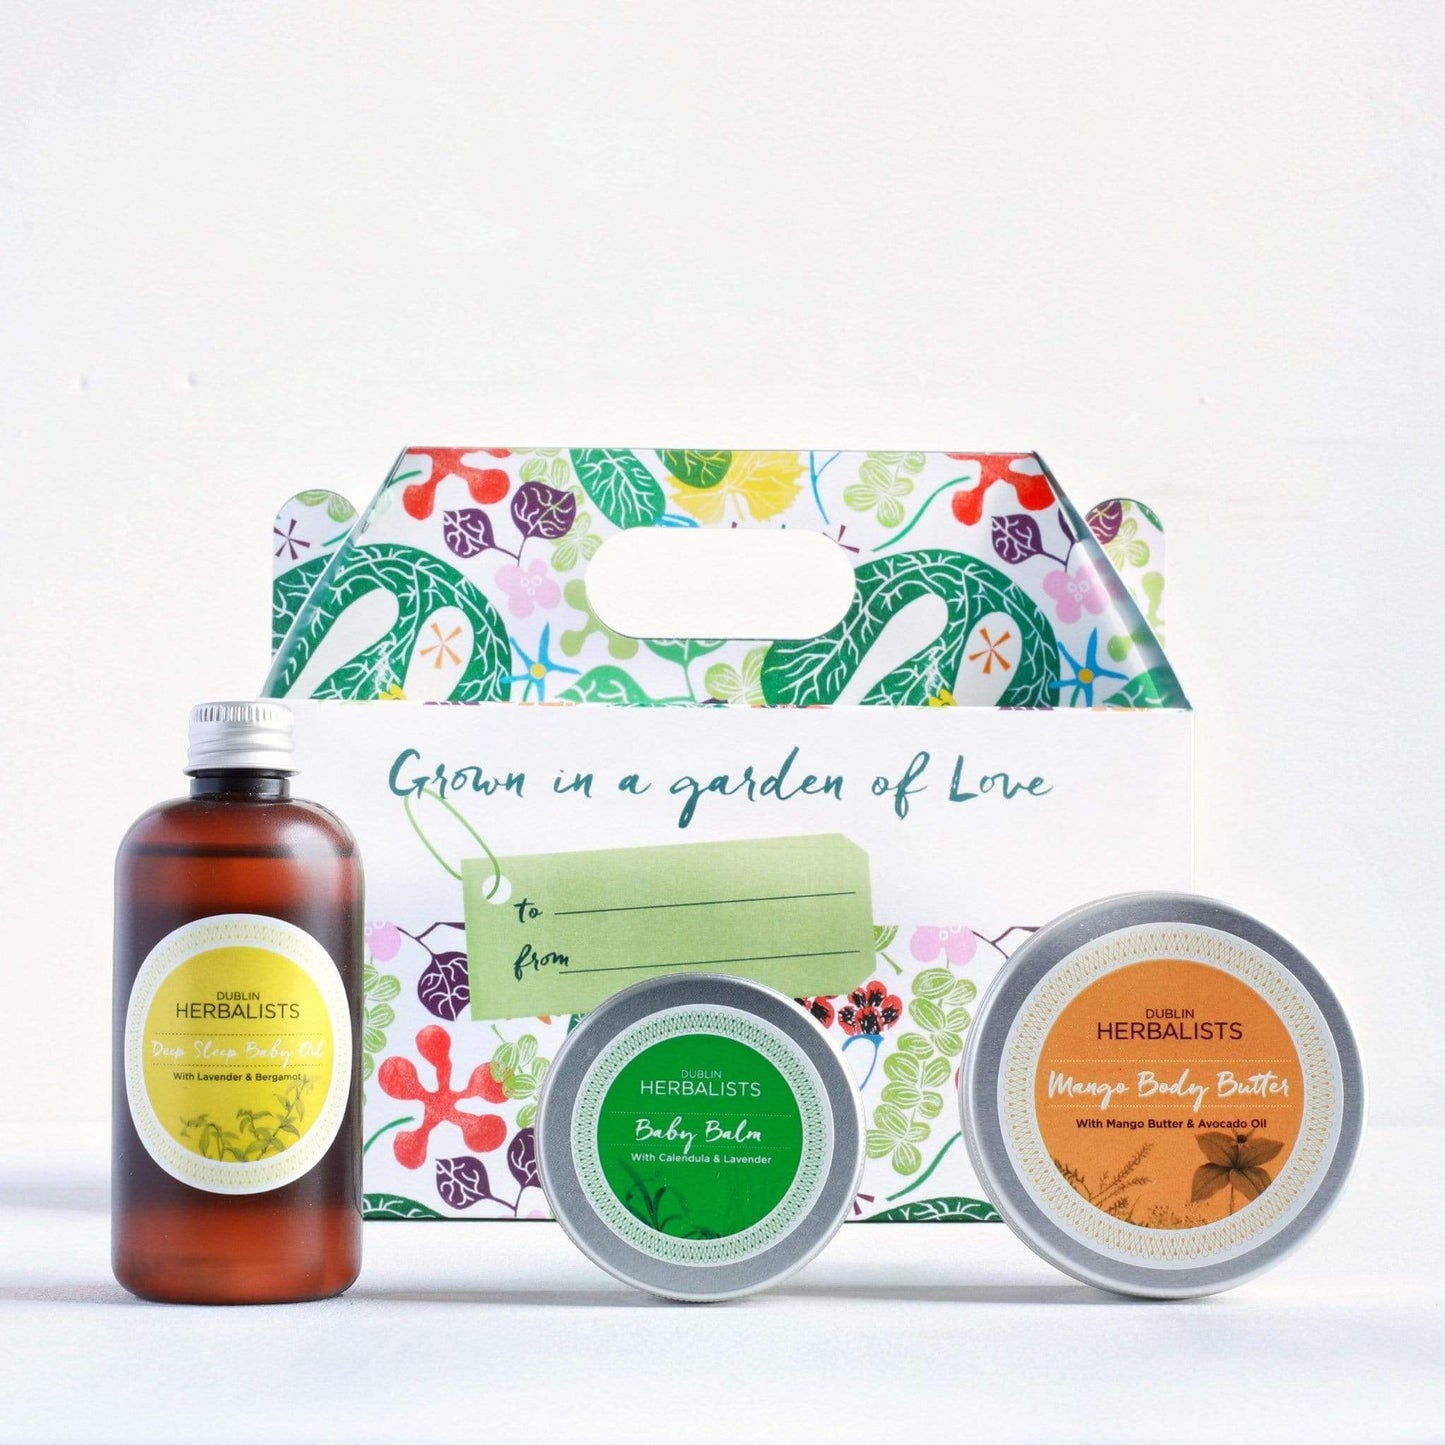 Load image into Gallery viewer, Dublin Herbalists Gift Box New Baby Collection Gift Set - Dublin Herbalists
